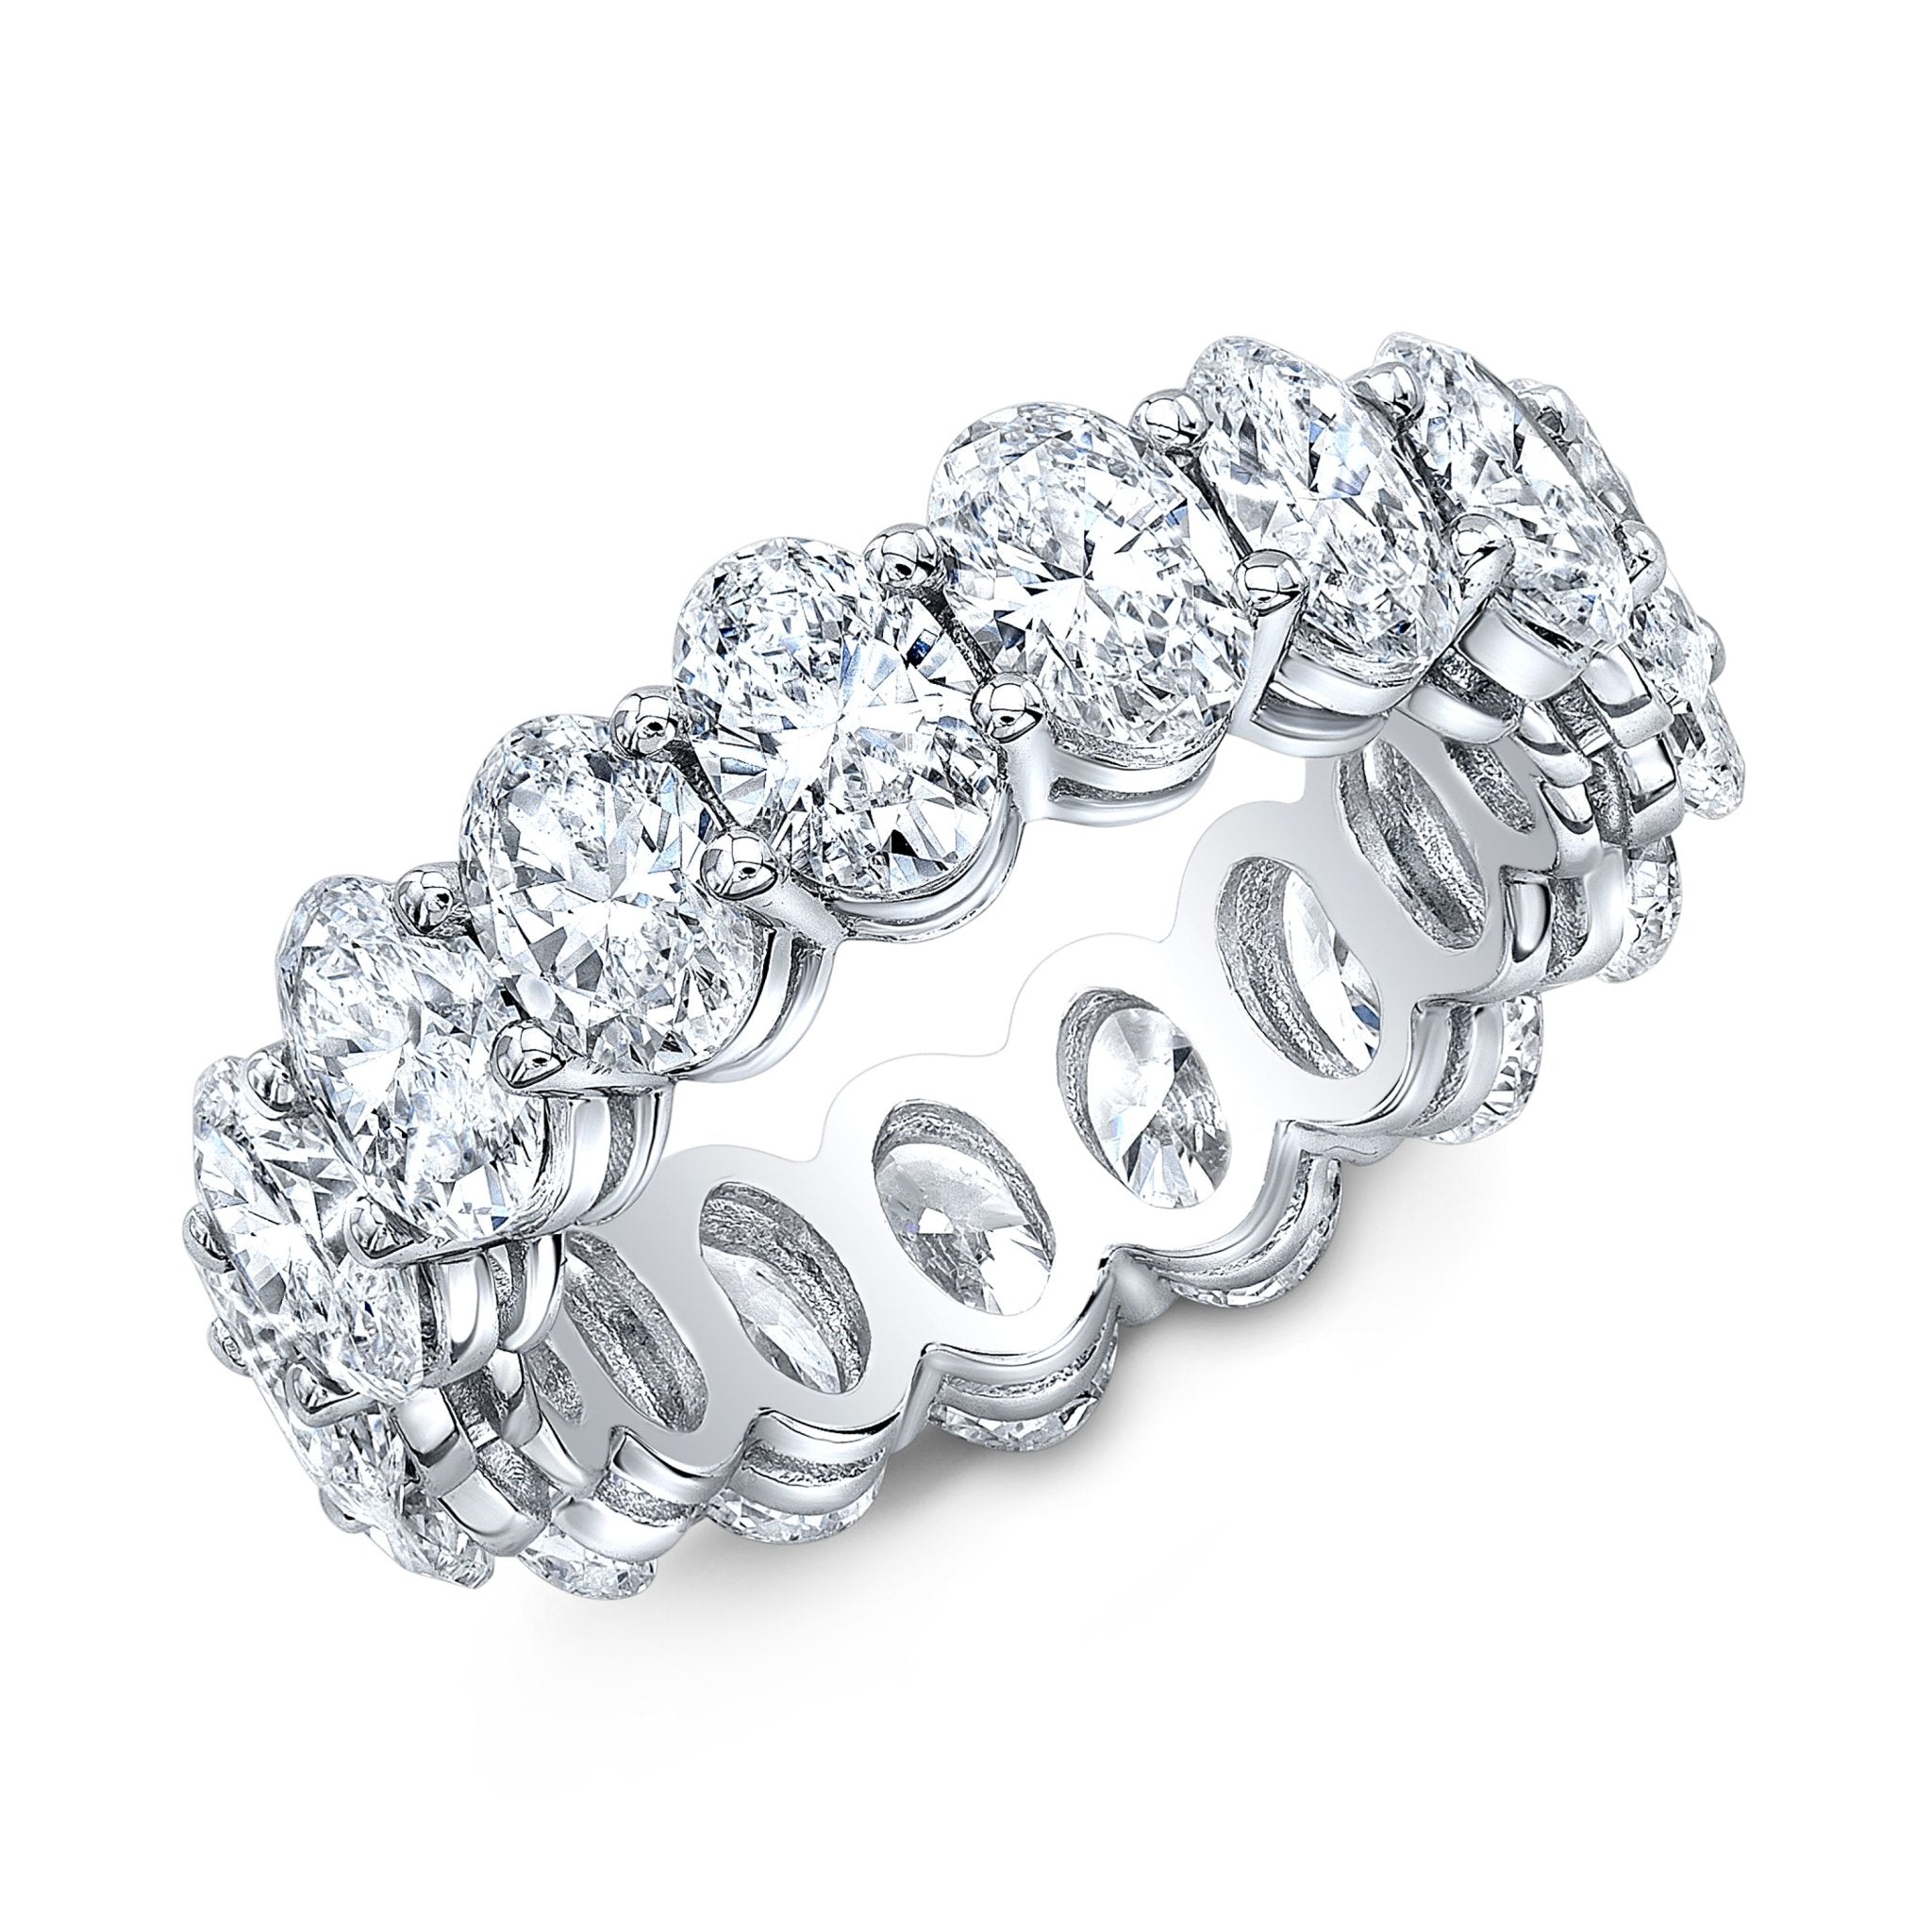 The Royal Oval Eternity Ring